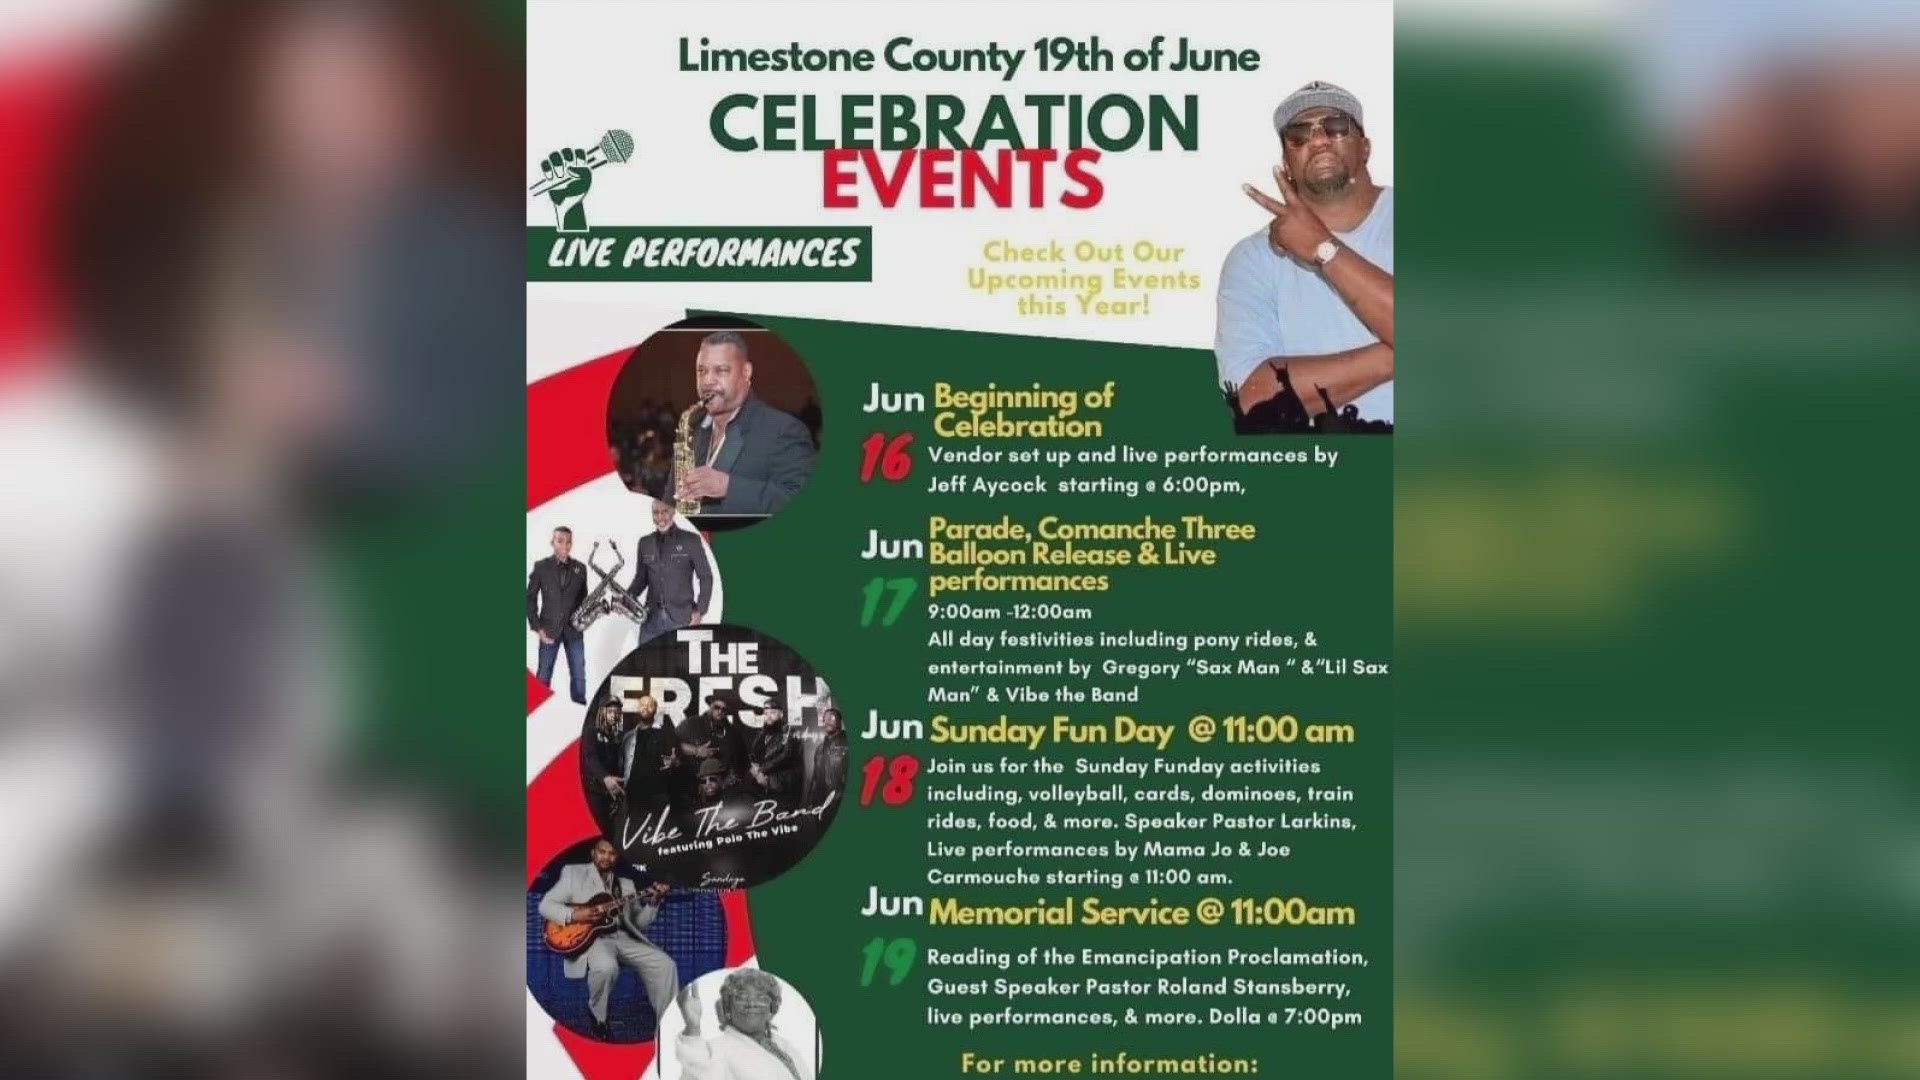 From parades, to performances, to proclamations, Central Texans are ready to celebrate African-American independence this Juneteenth weekend.